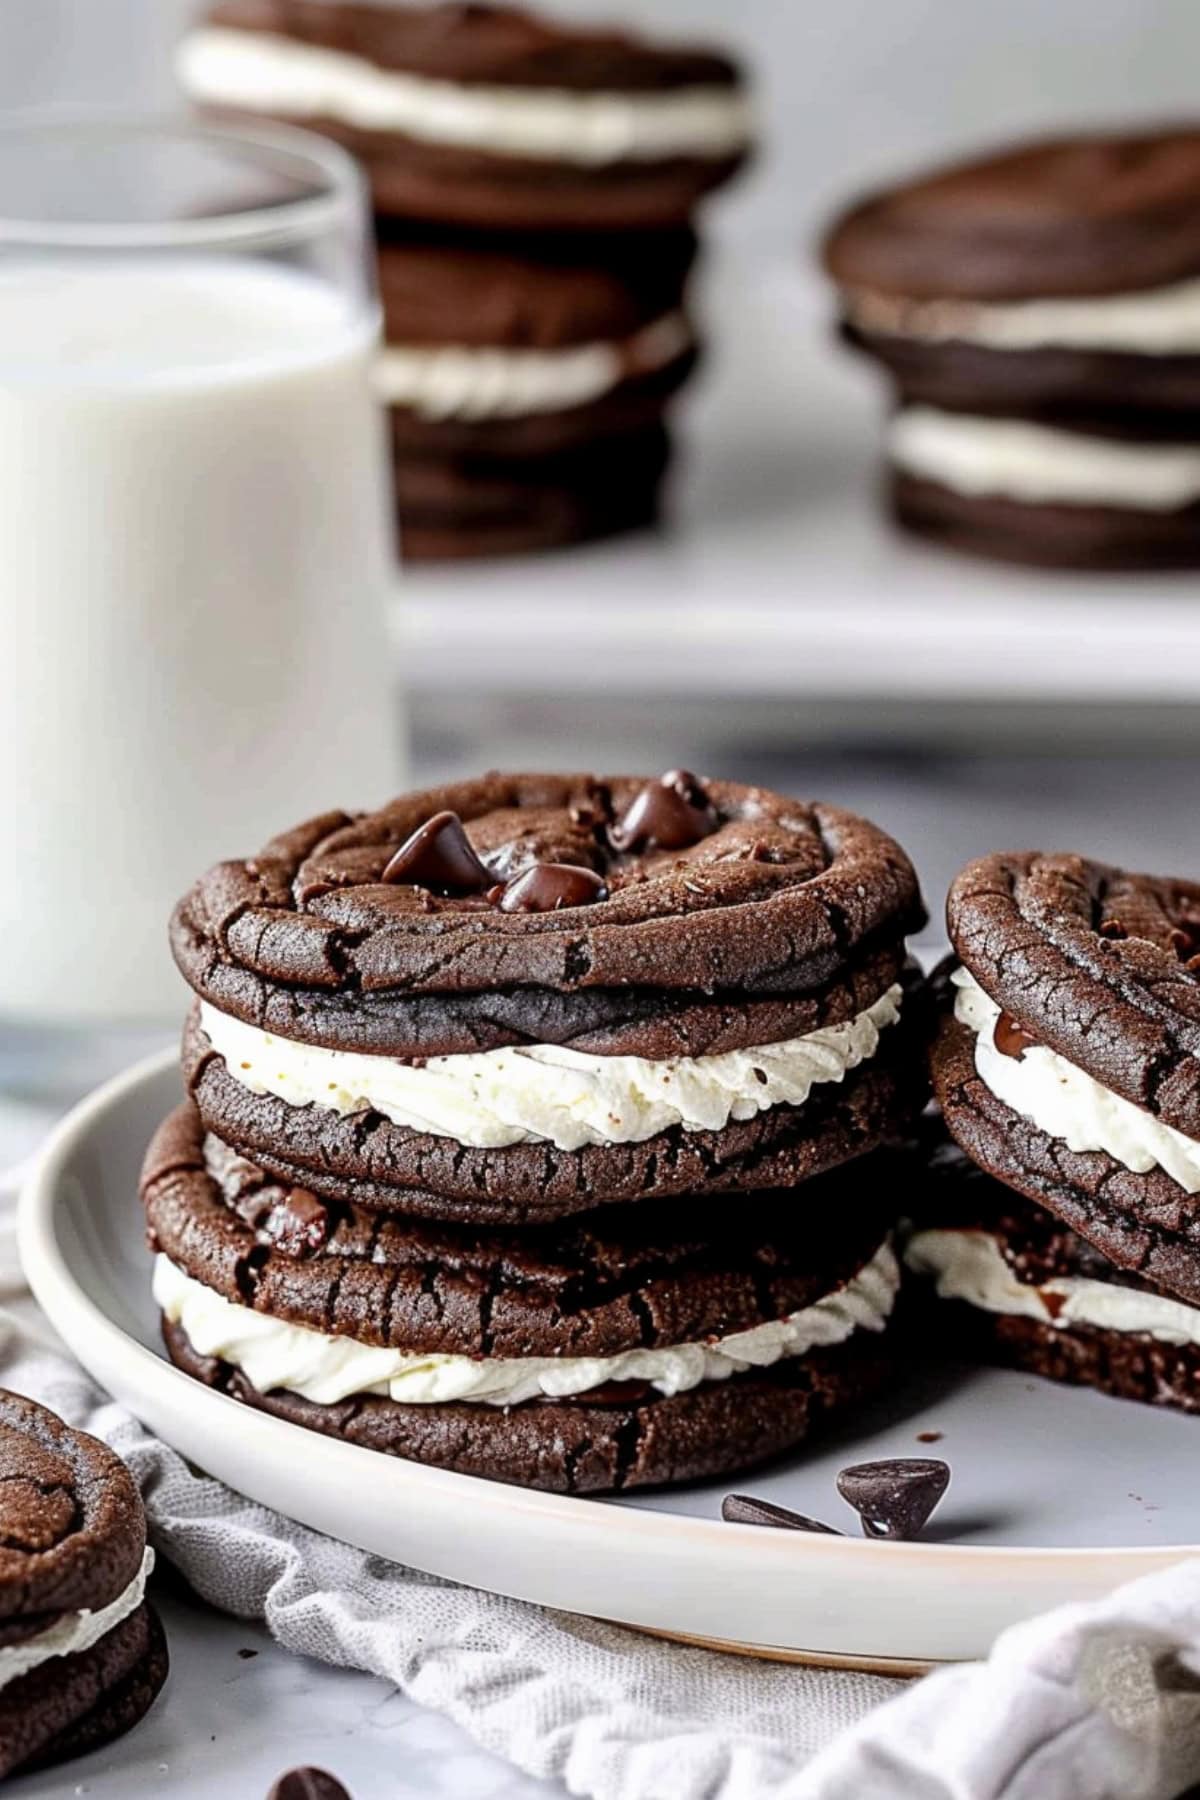 Chocolate sandwich cookies with creamy vanilla filling on a white plate with a glass of milk on the side